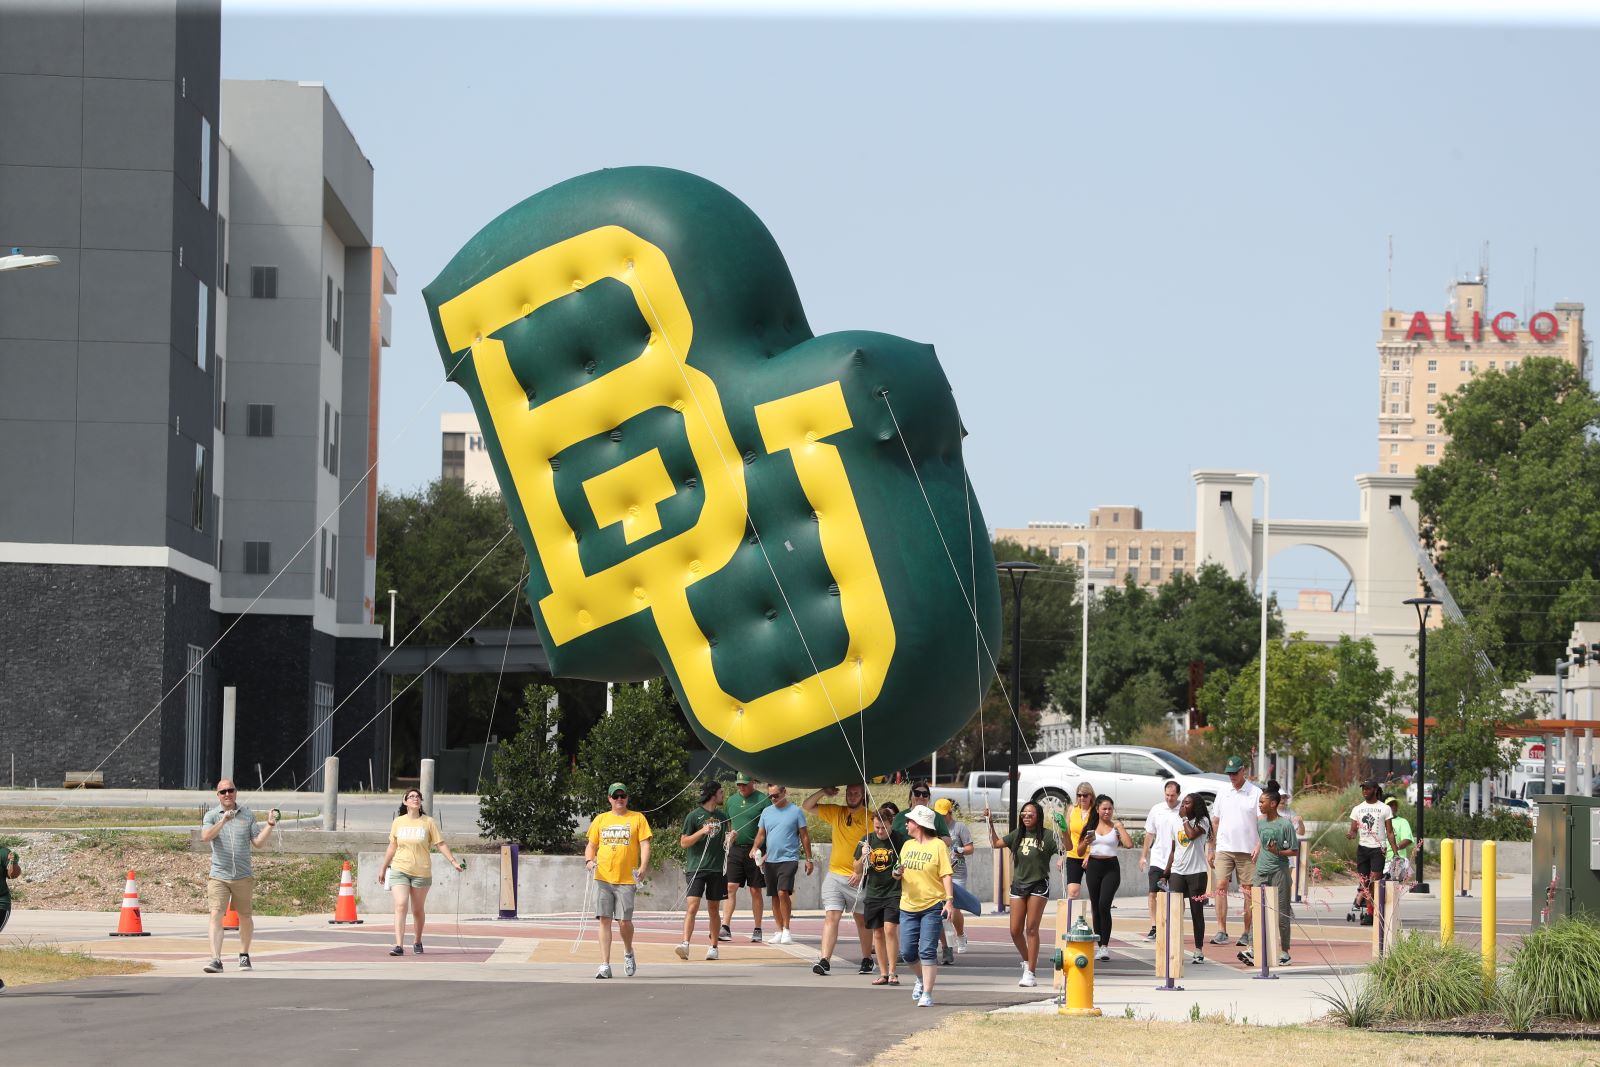 BU blimp being carried in downtown Waco